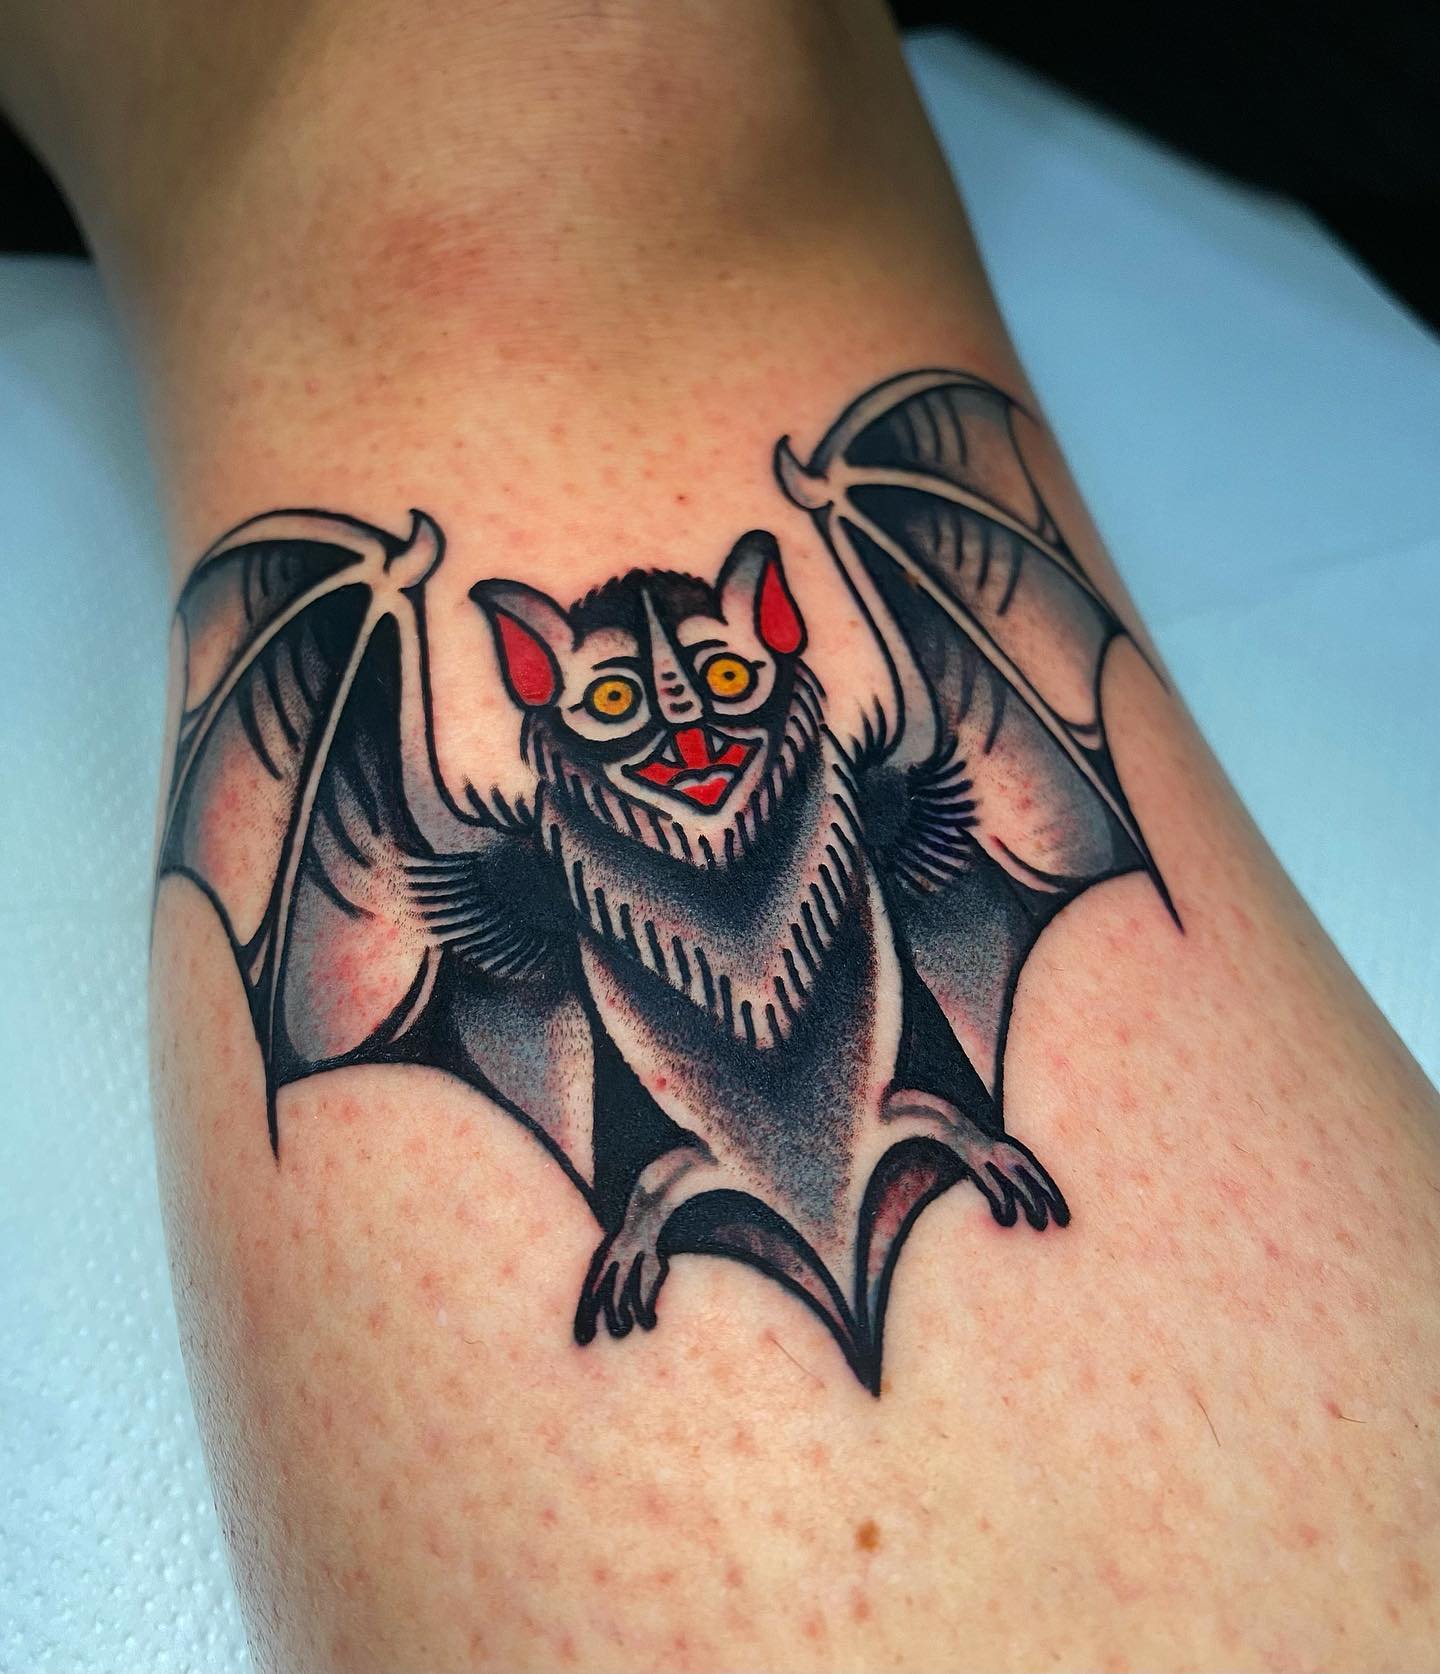 120 Bats Tattoo Designs Pictures Stock Photos Pictures  RoyaltyFree  Images  iStock